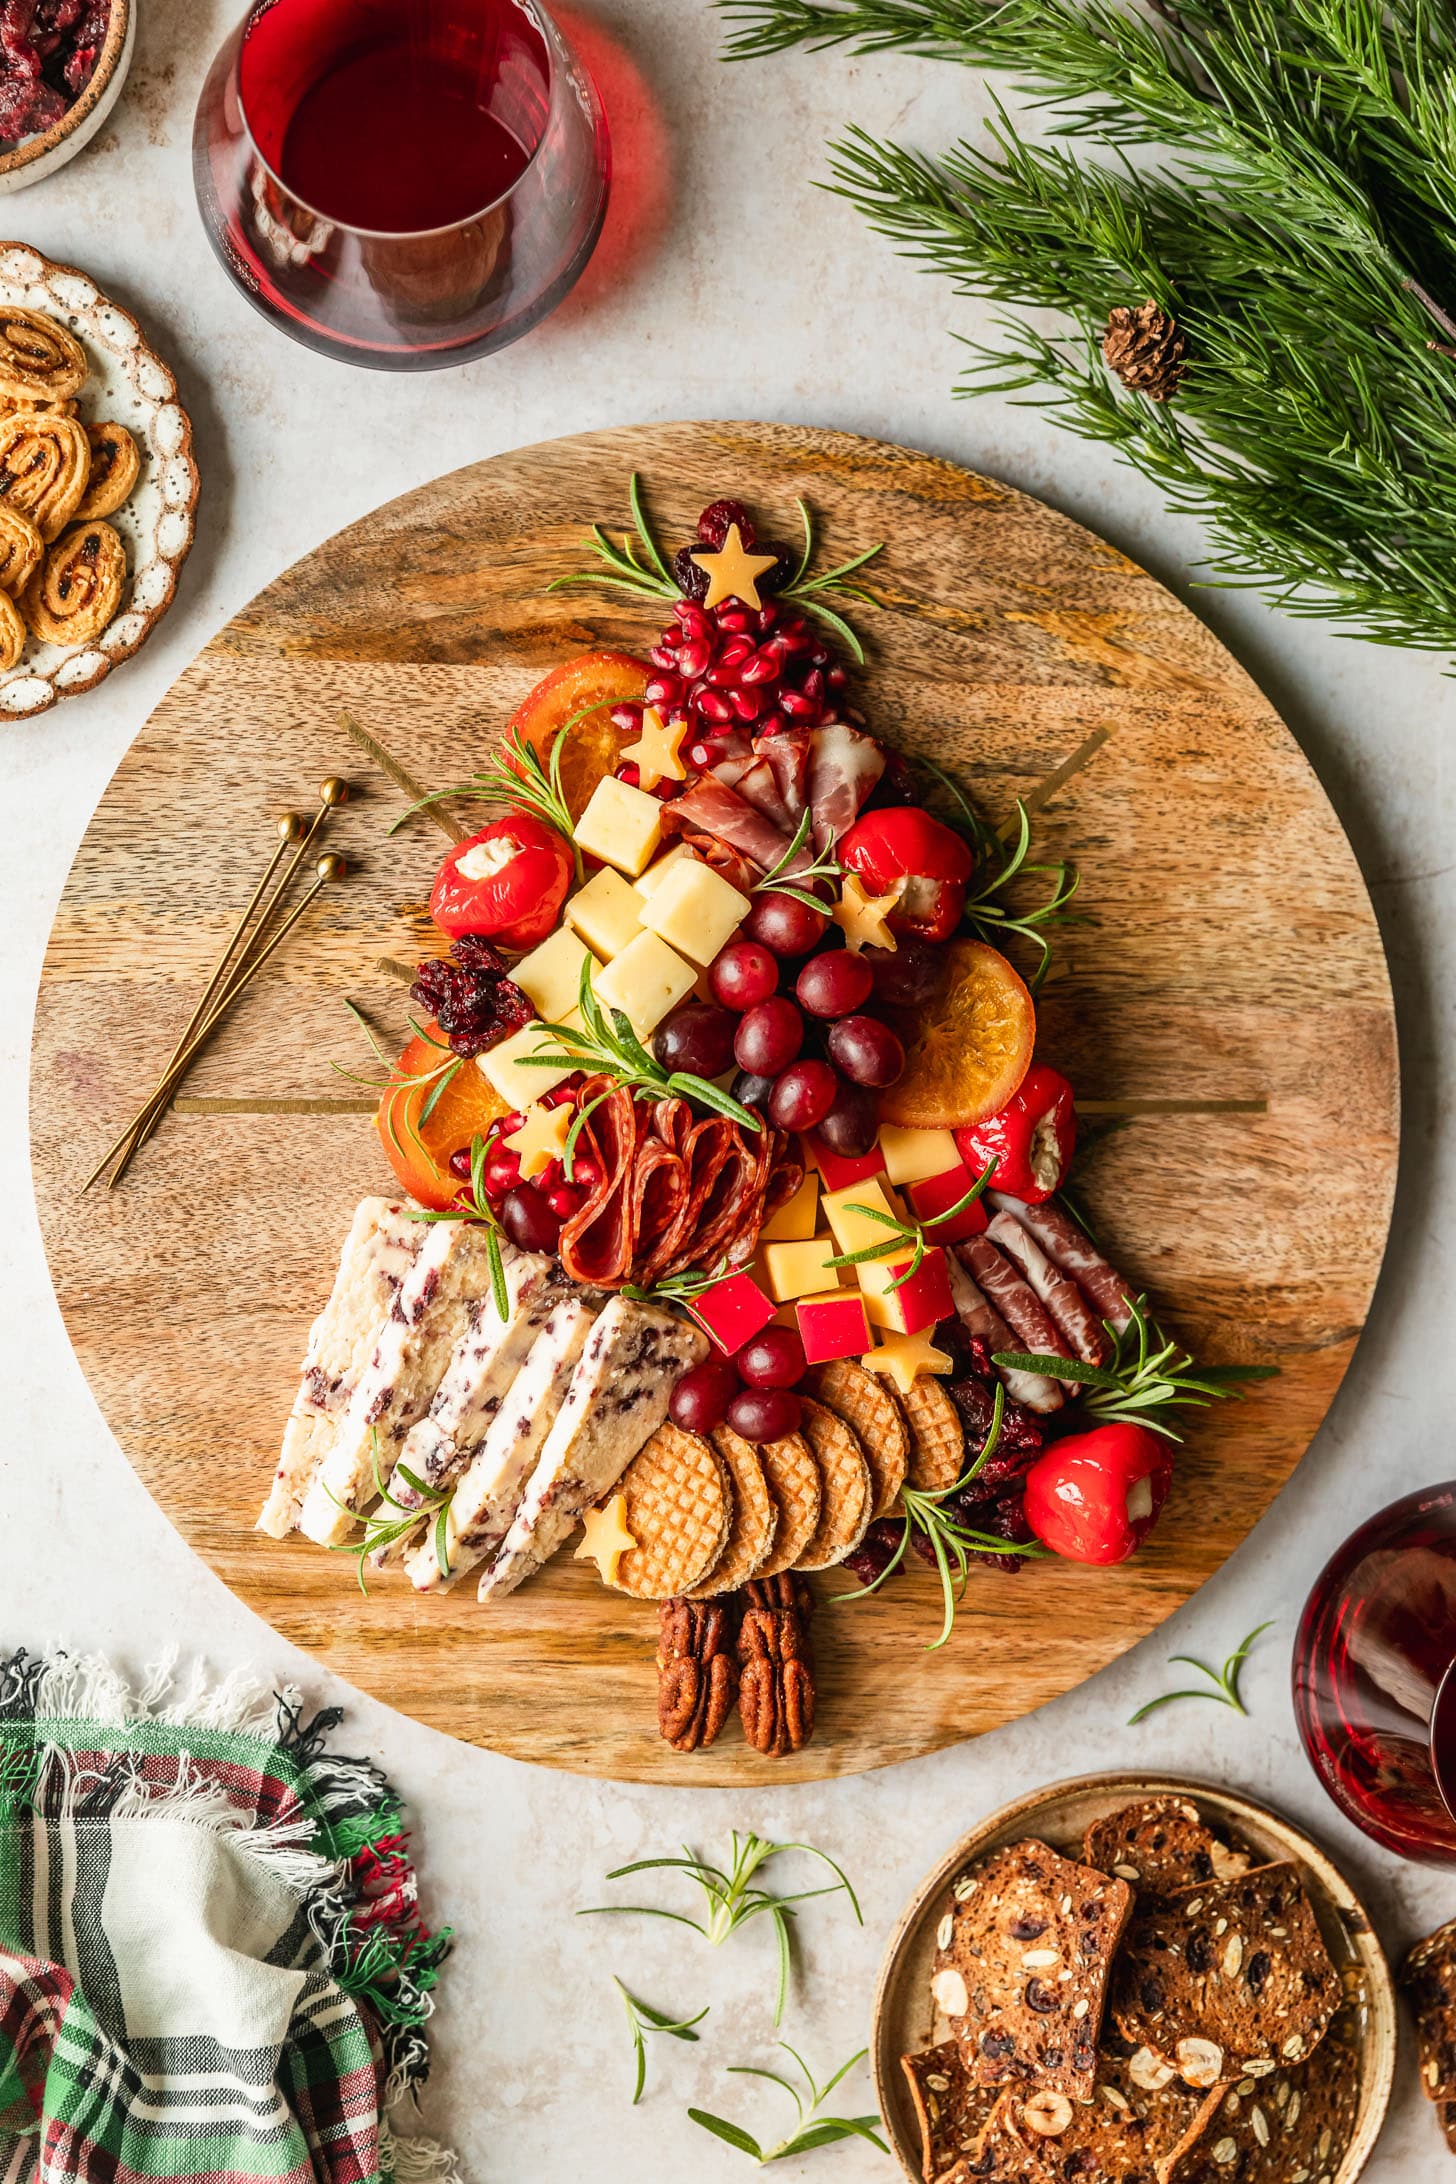 A Christmas tree charcuterie board on a wood board next to a plaid linen, glasses of red wine, and brown plates of crackers.